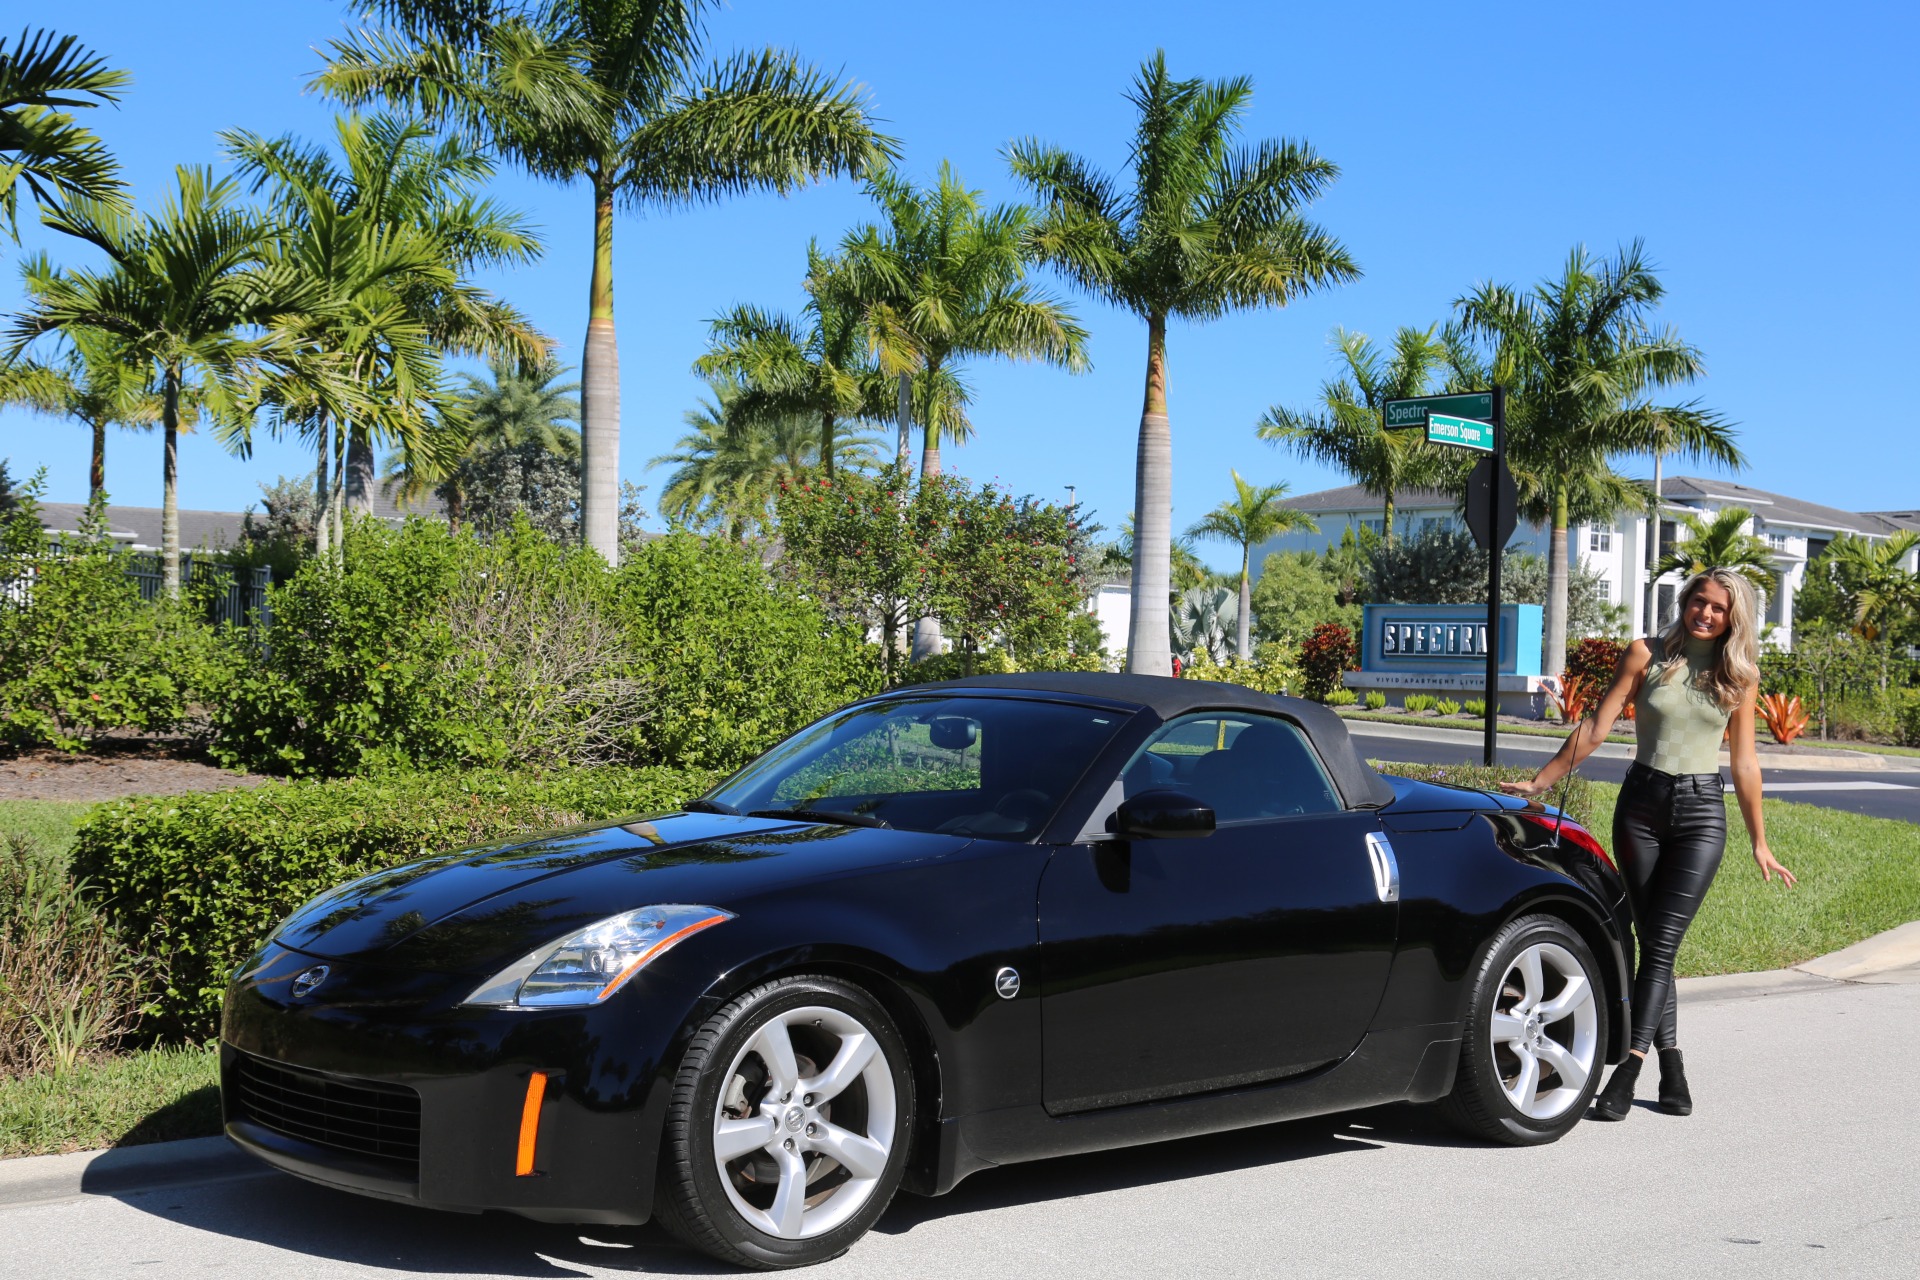 Used 2004 Nissan 350Z Convertible for sale Sold at Muscle Cars for Sale Inc. in Fort Myers FL 33912 7